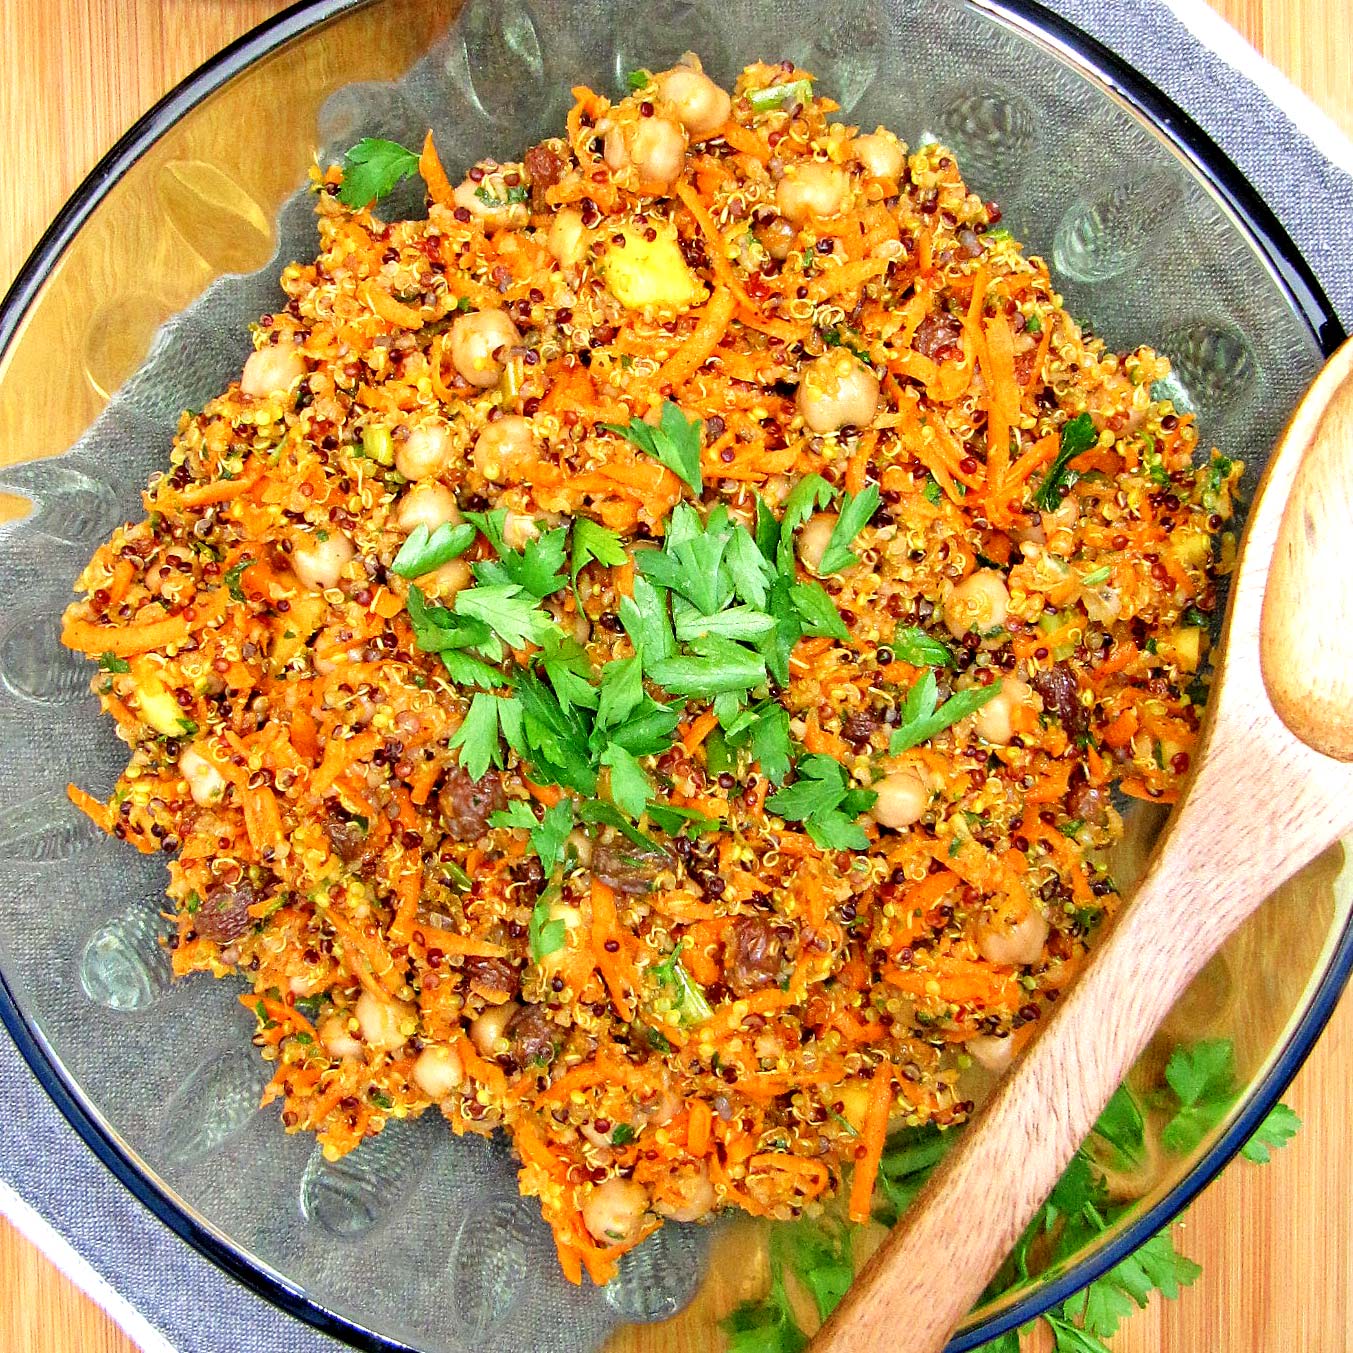 Curried Quinoa and Chickpea Salad with Carrots, Apples & Raisins